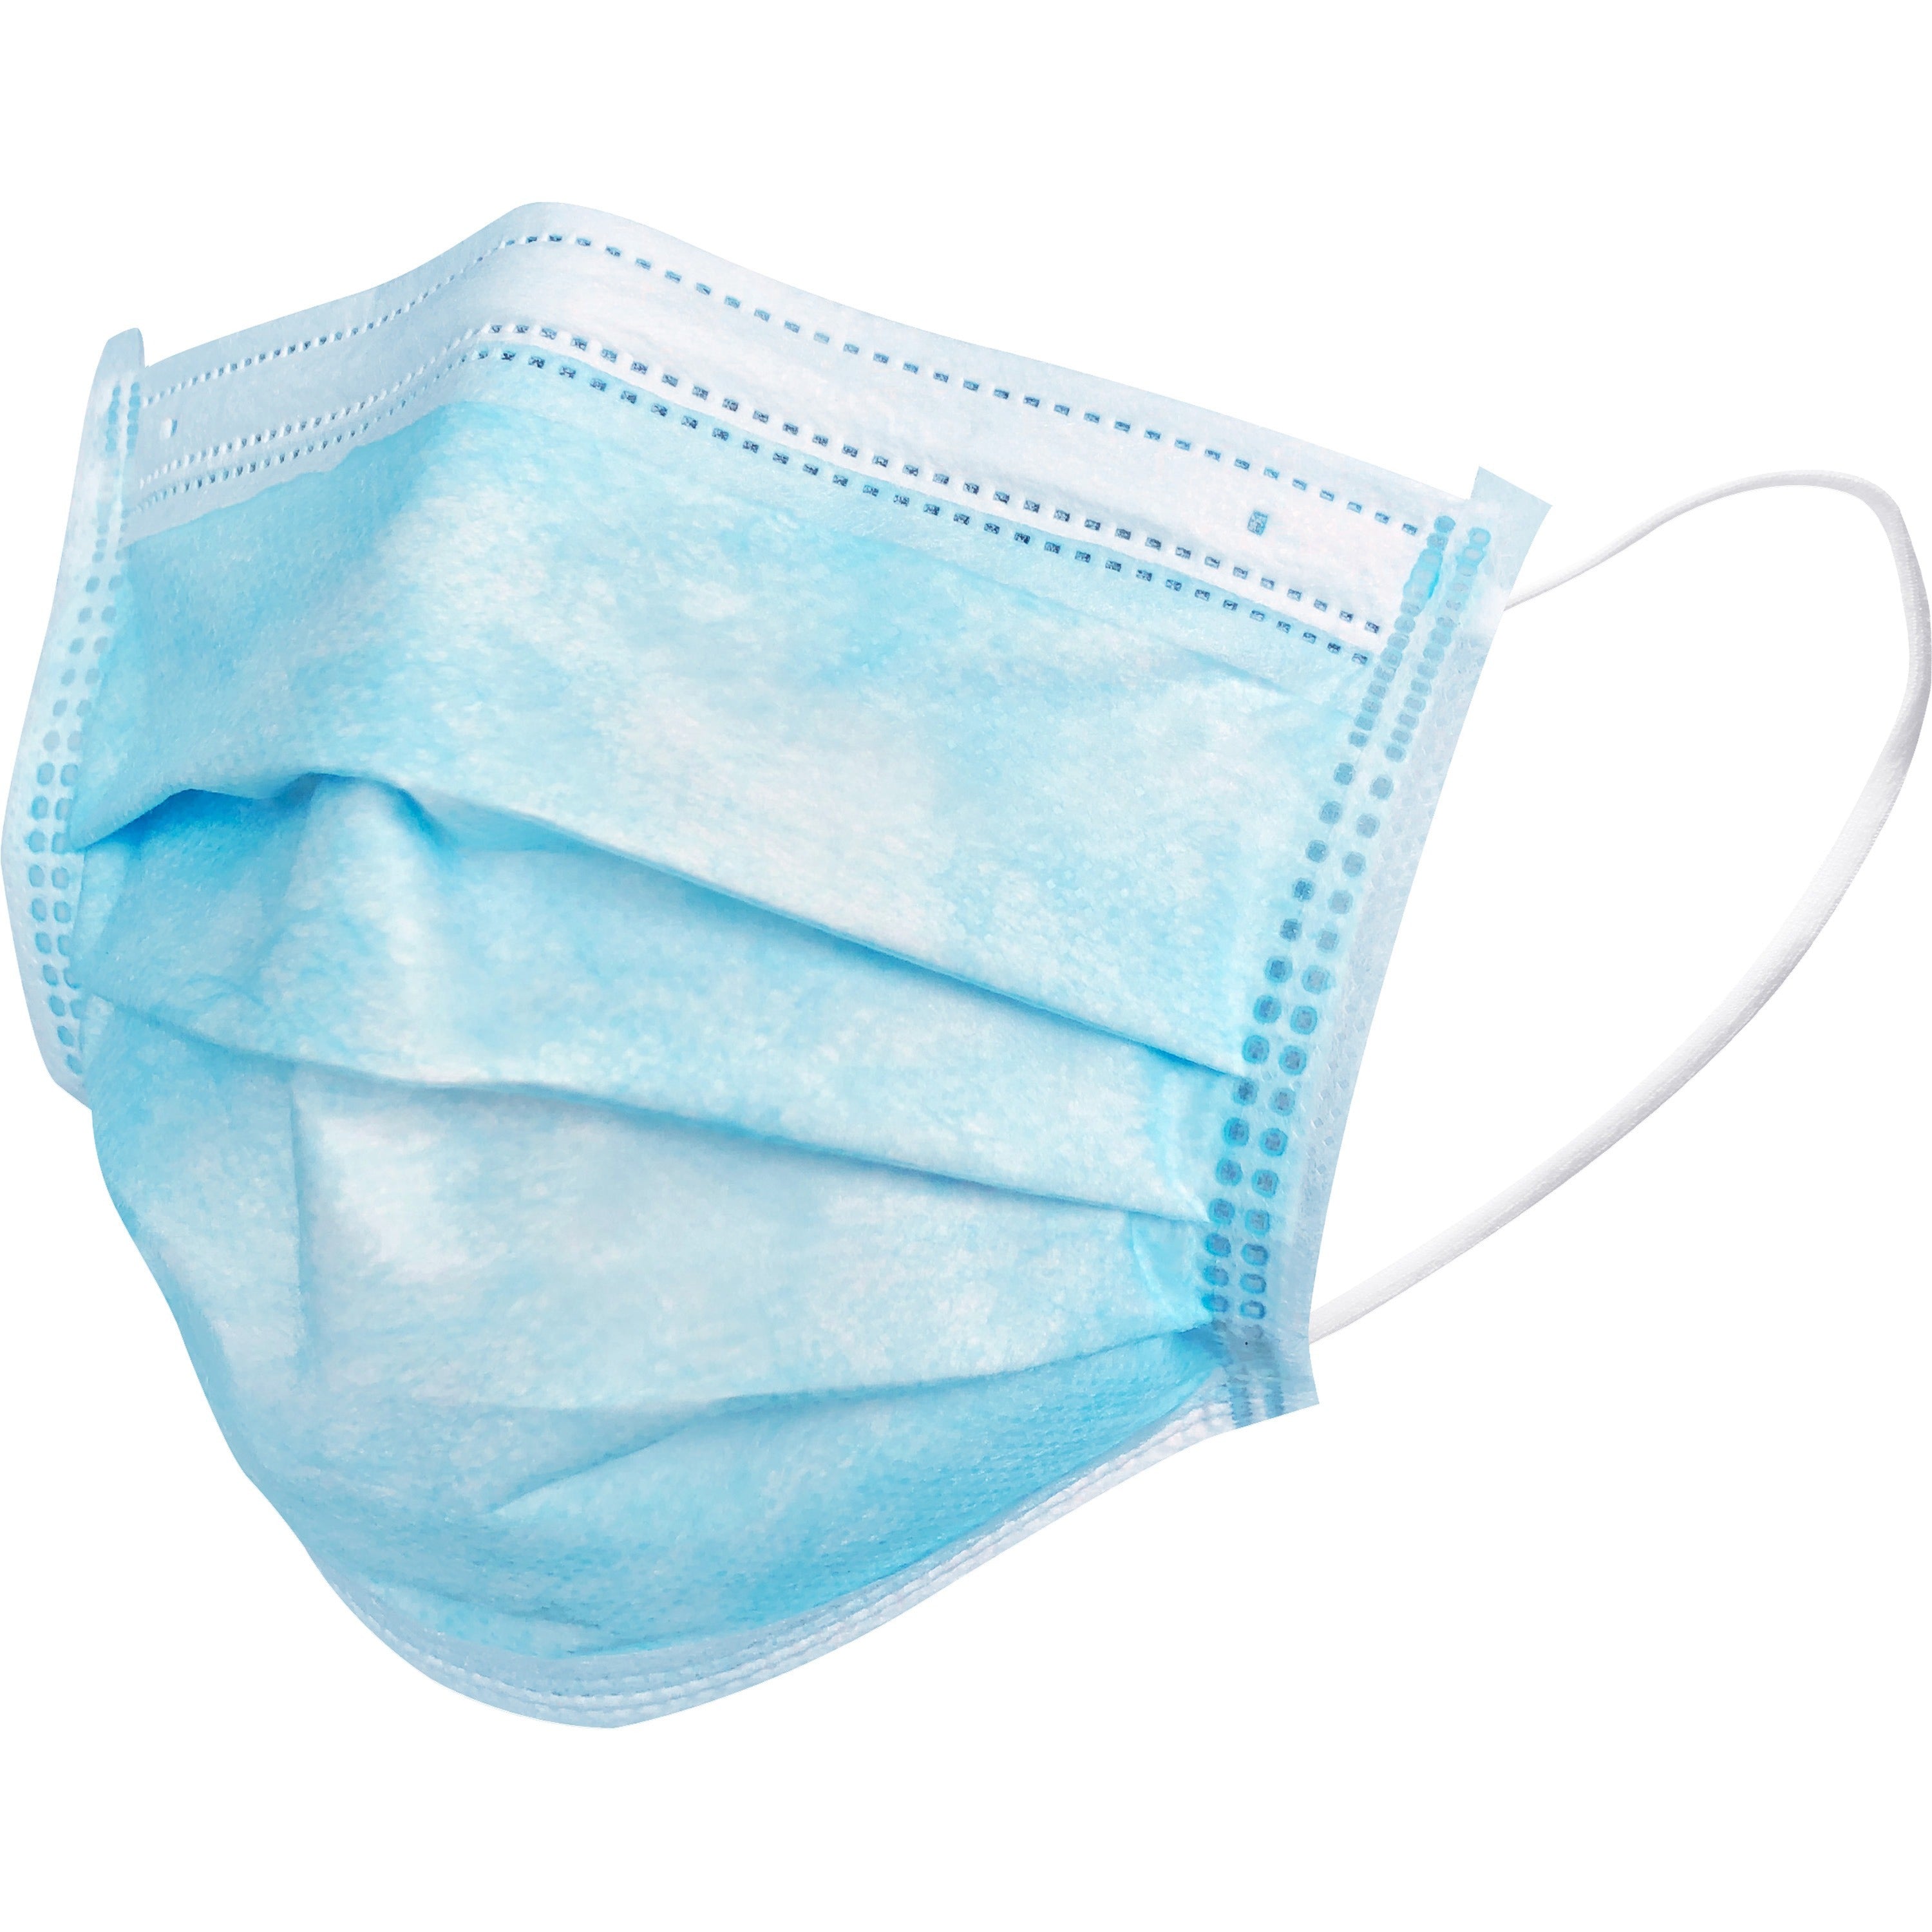 special-buy-child-face-mask-recommended-for-face-blue-disposable-comfortable-soft-pleated-earloop-style-mask-latex-free-50-box_spz85171 - 1